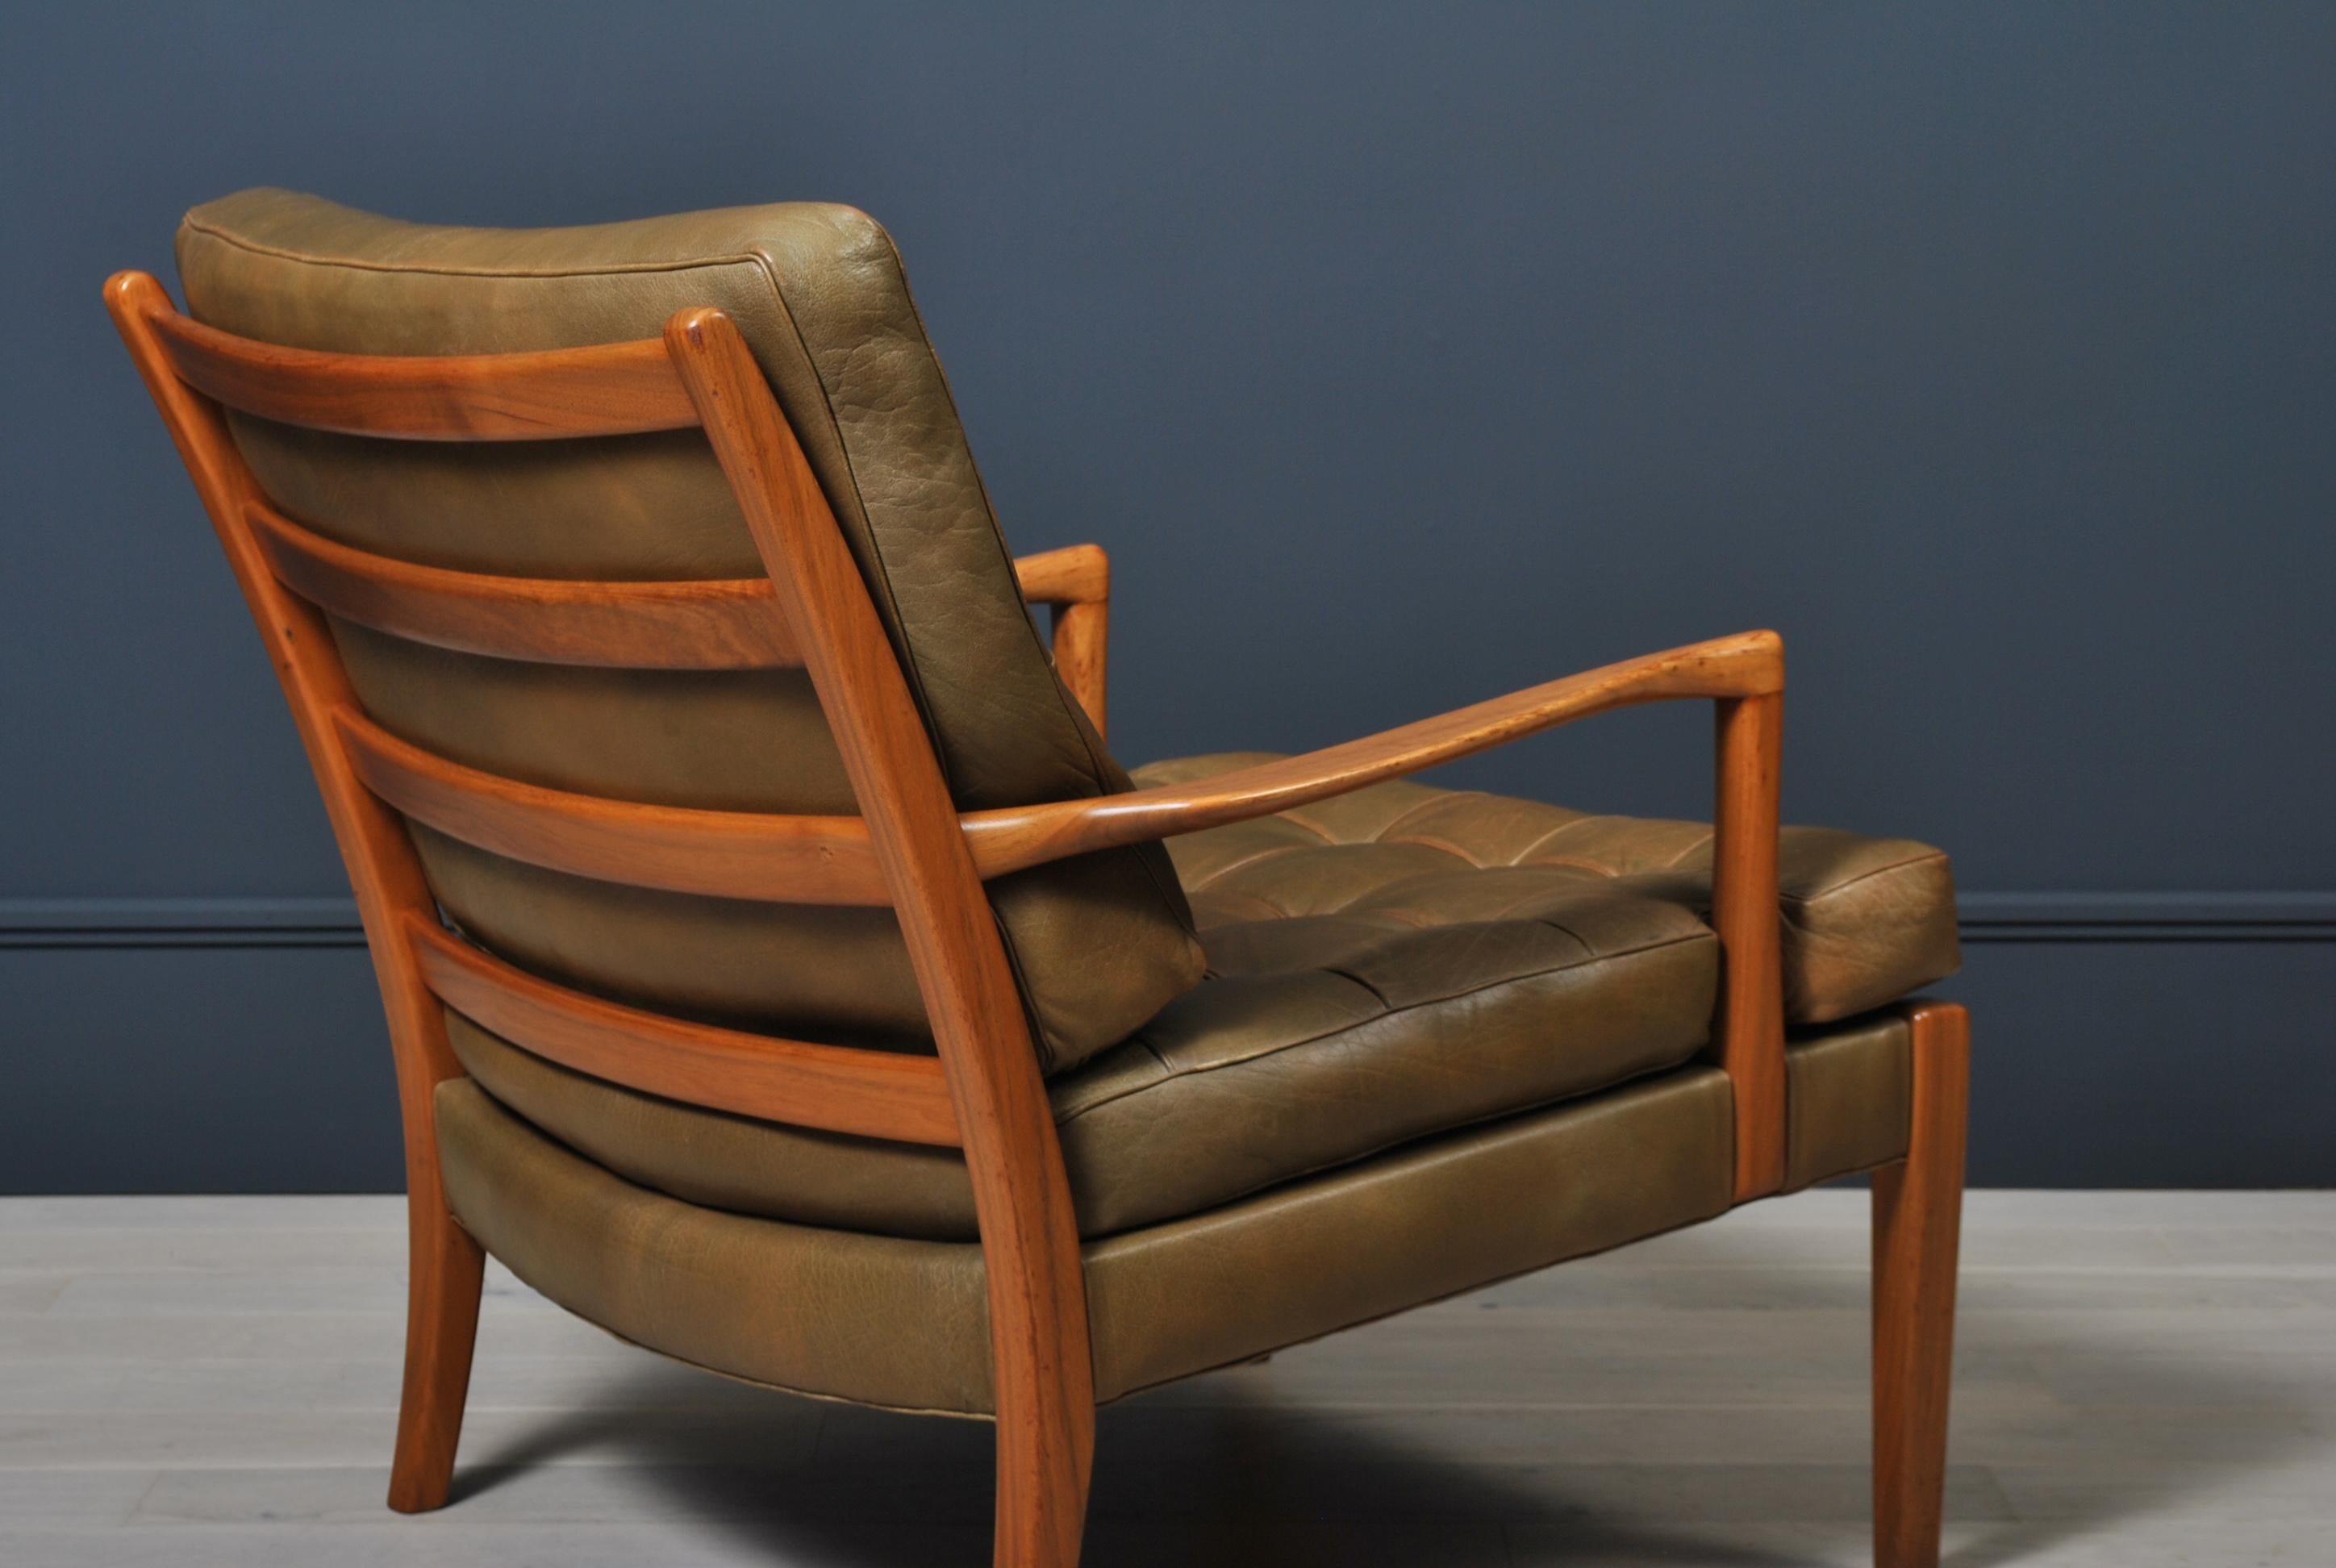 Wonderful example of the Arne Norell lounge chair, model ‘Loven’.
Walnut frame with lovely coloured Buffalo hide leather upholstery. 
Produced by Arne Norell, Sweden circa 1960.